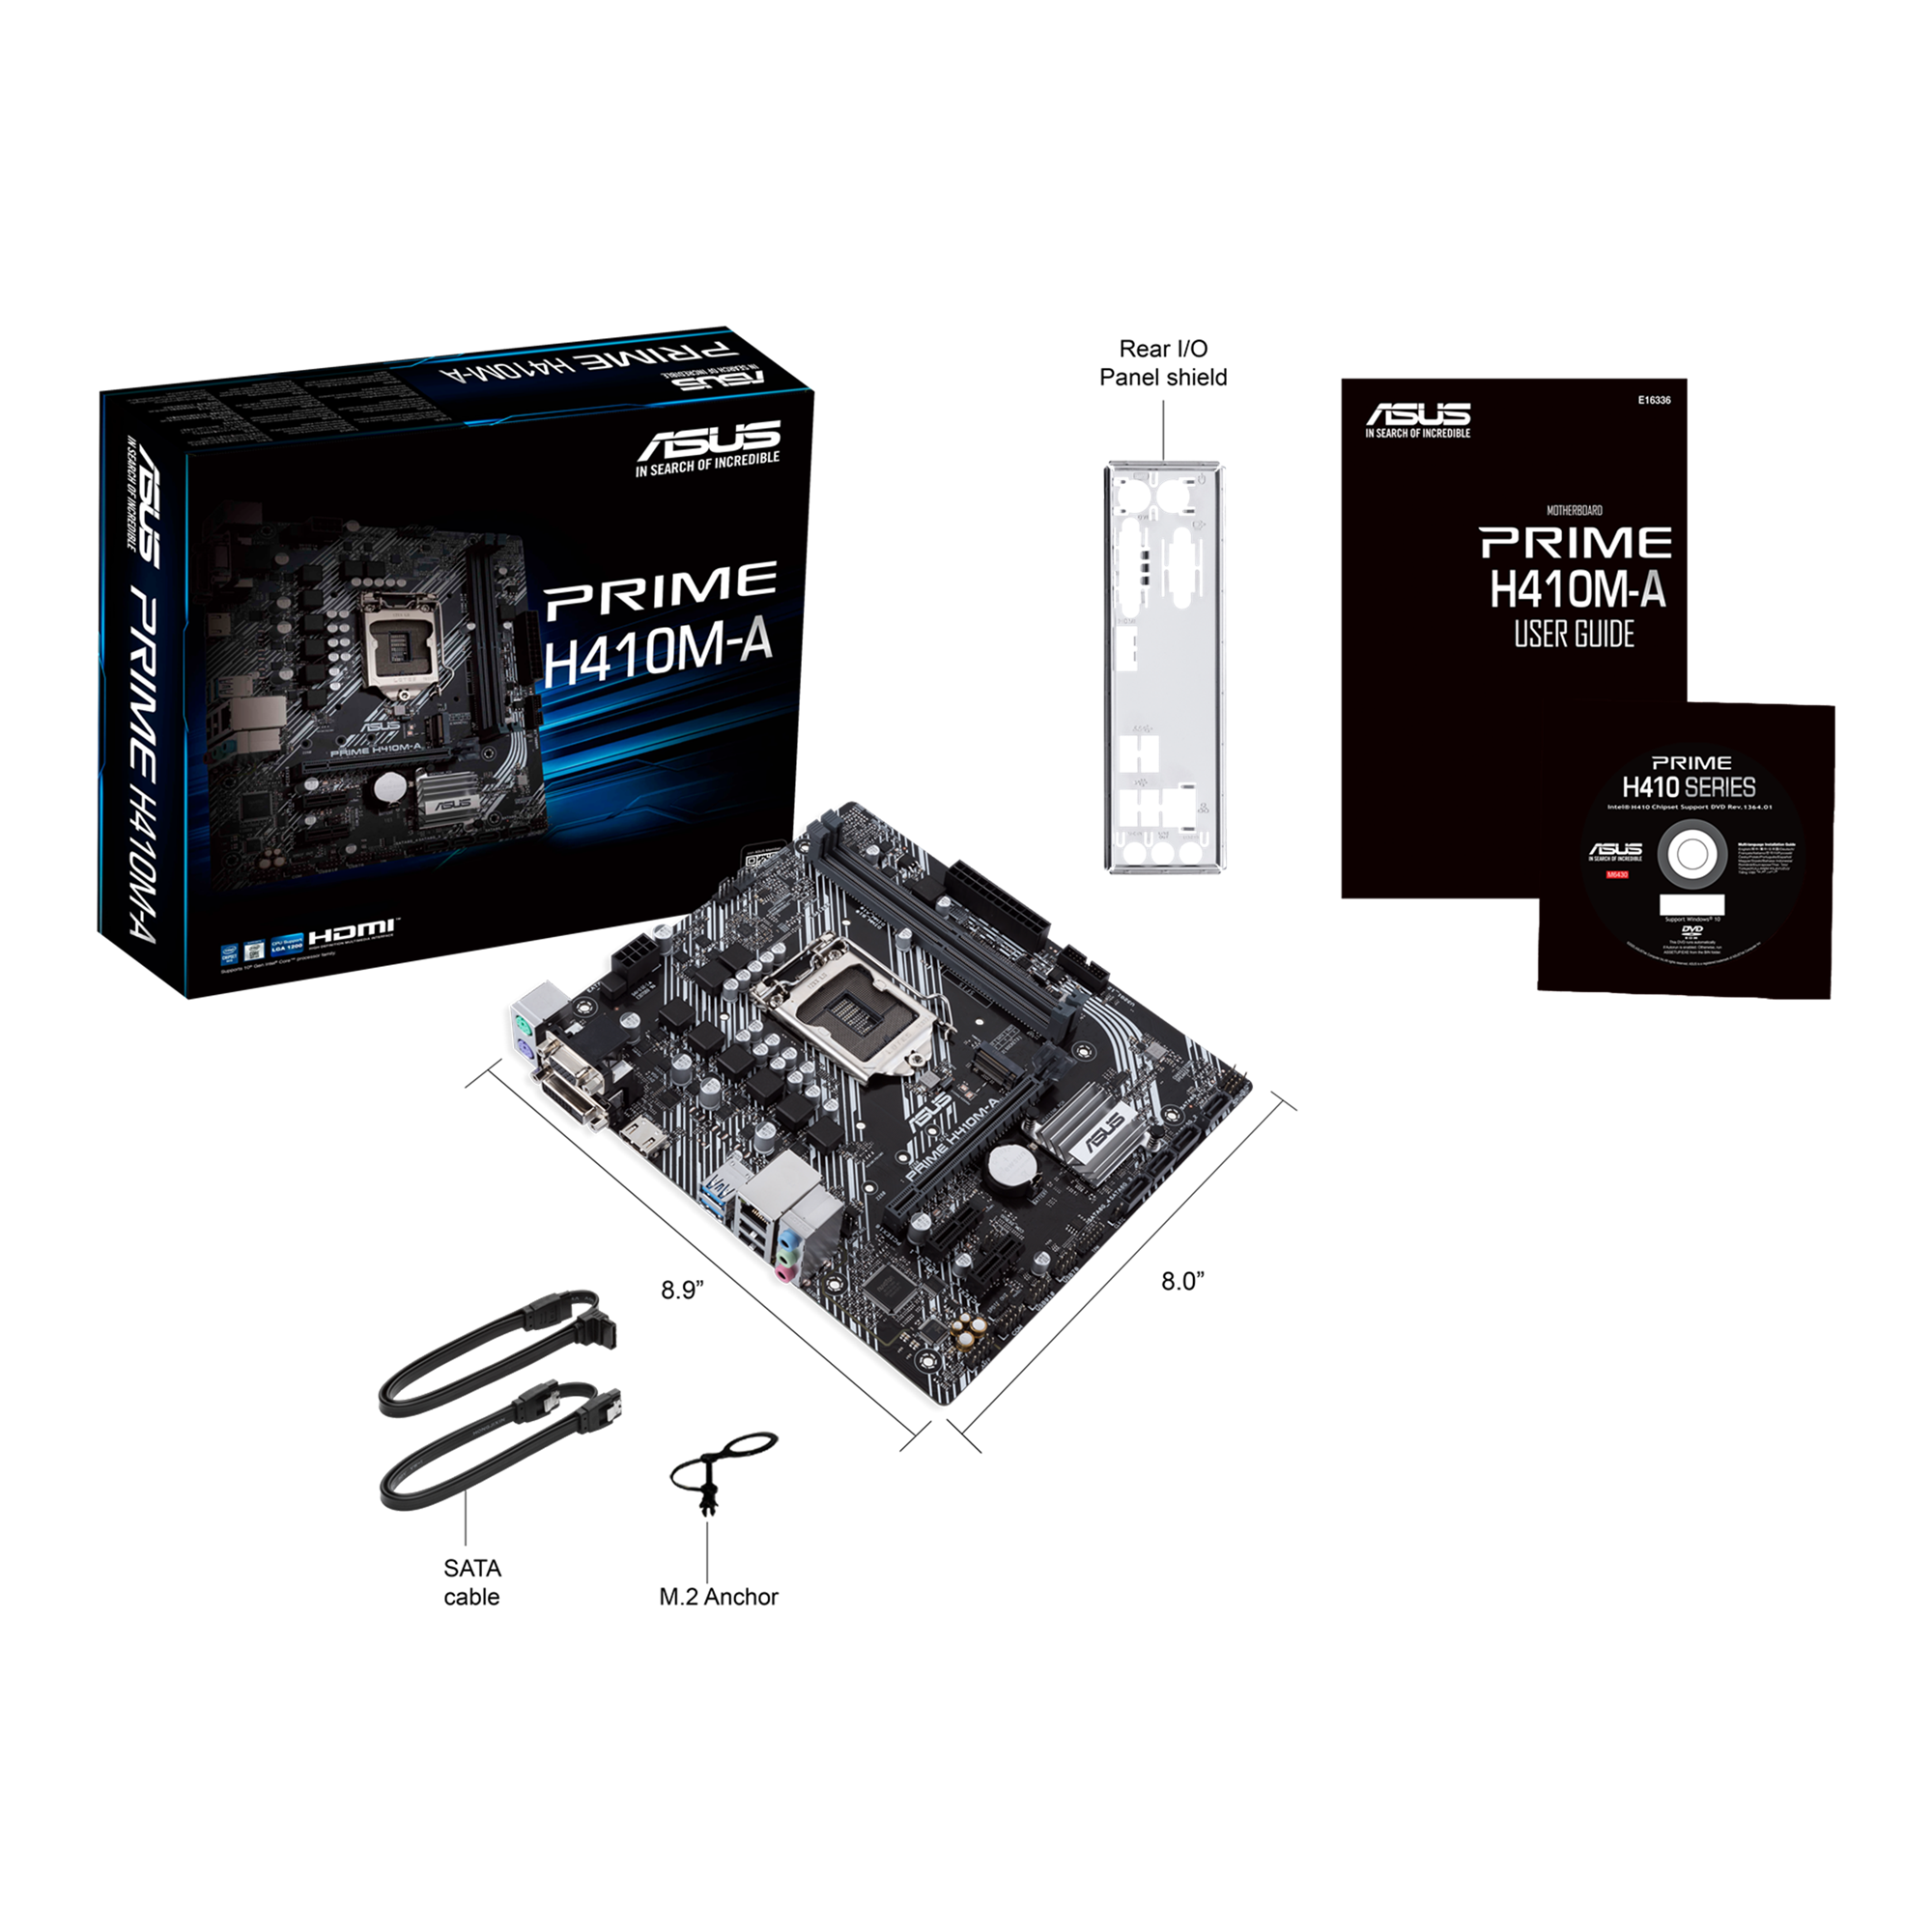 PRIME H410M-A｜Motherboards｜ASUS USA